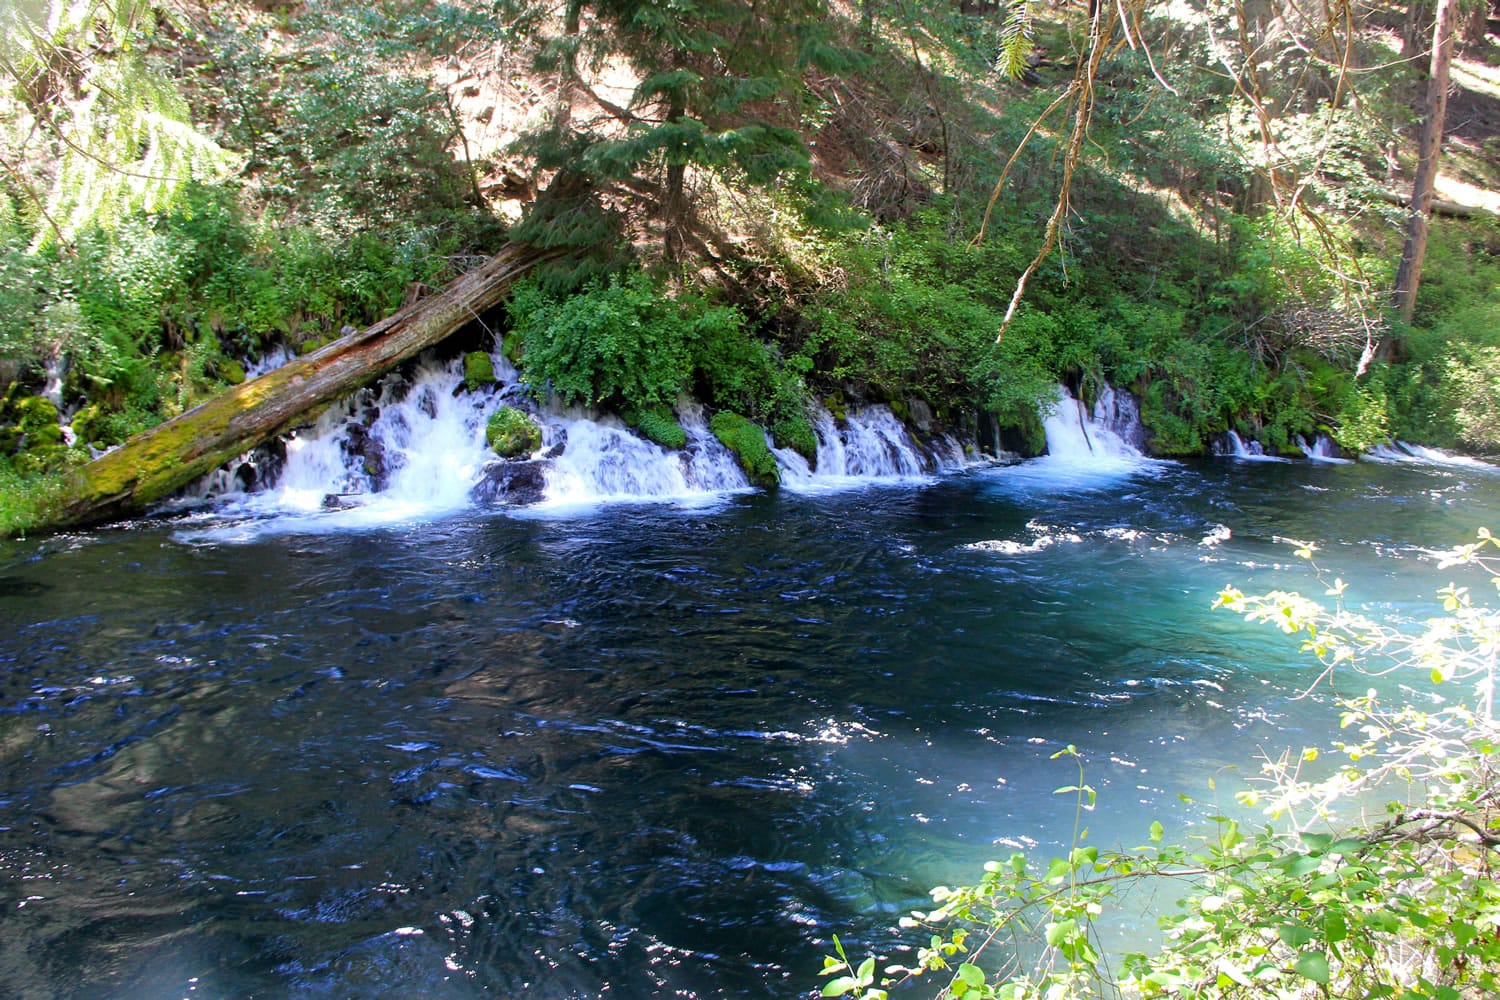 Pay a visit to glorious Metolius - The Columbian